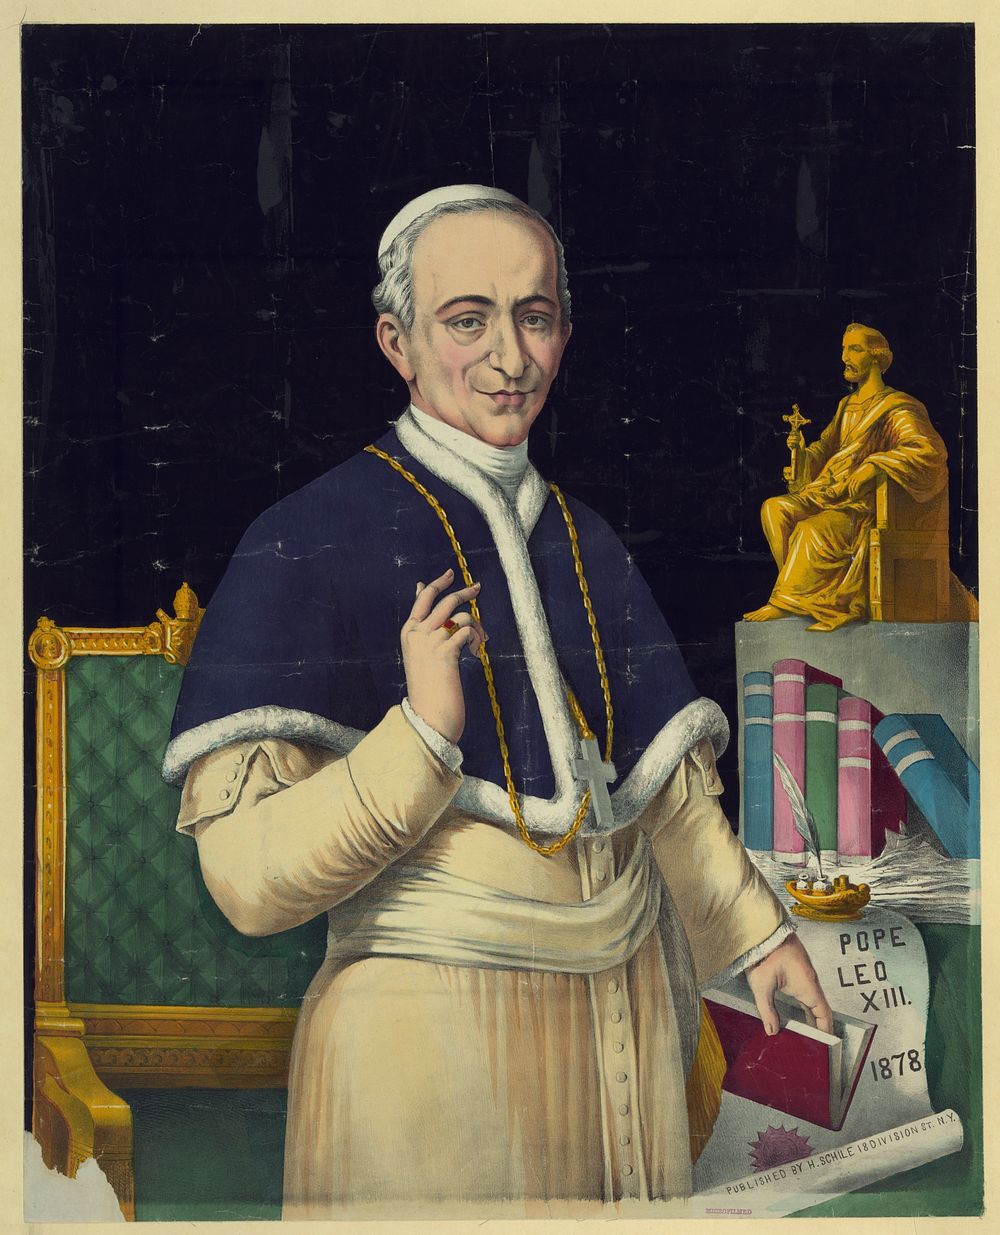 Pope Leo XIII by Schile, H. (Henry)